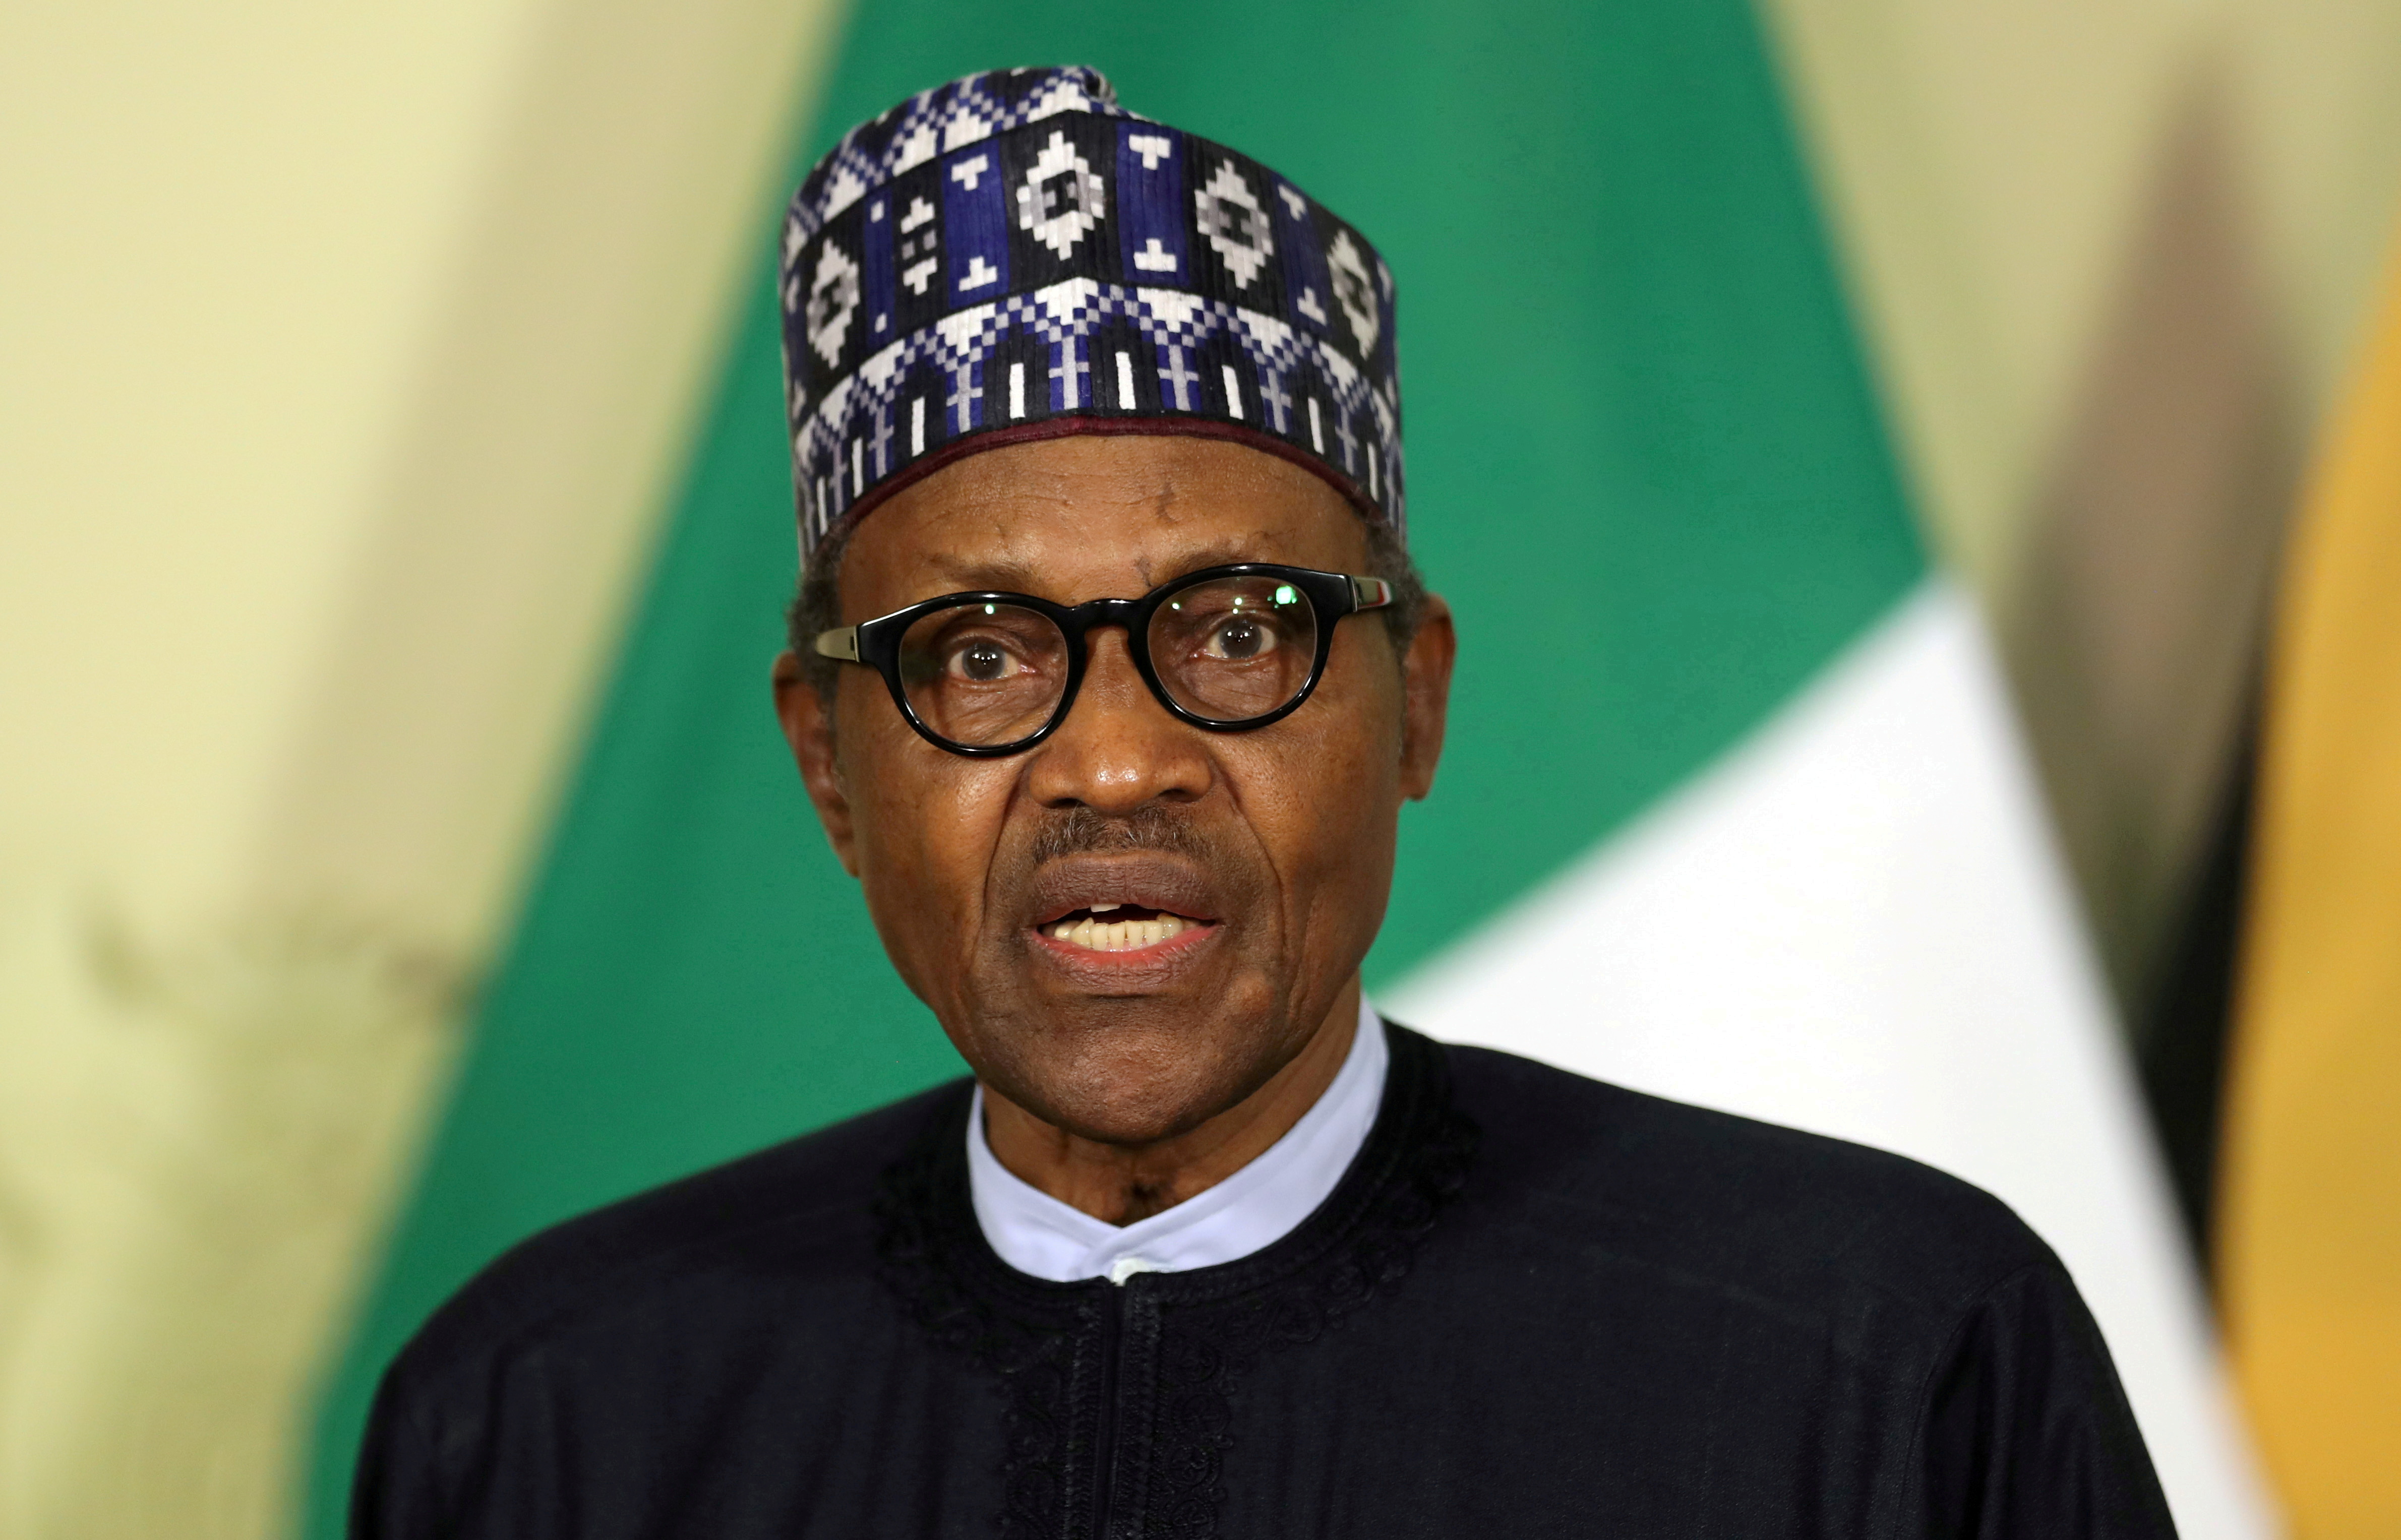 Nigerian President Buhari meets with his South African counterpart in Pretoria